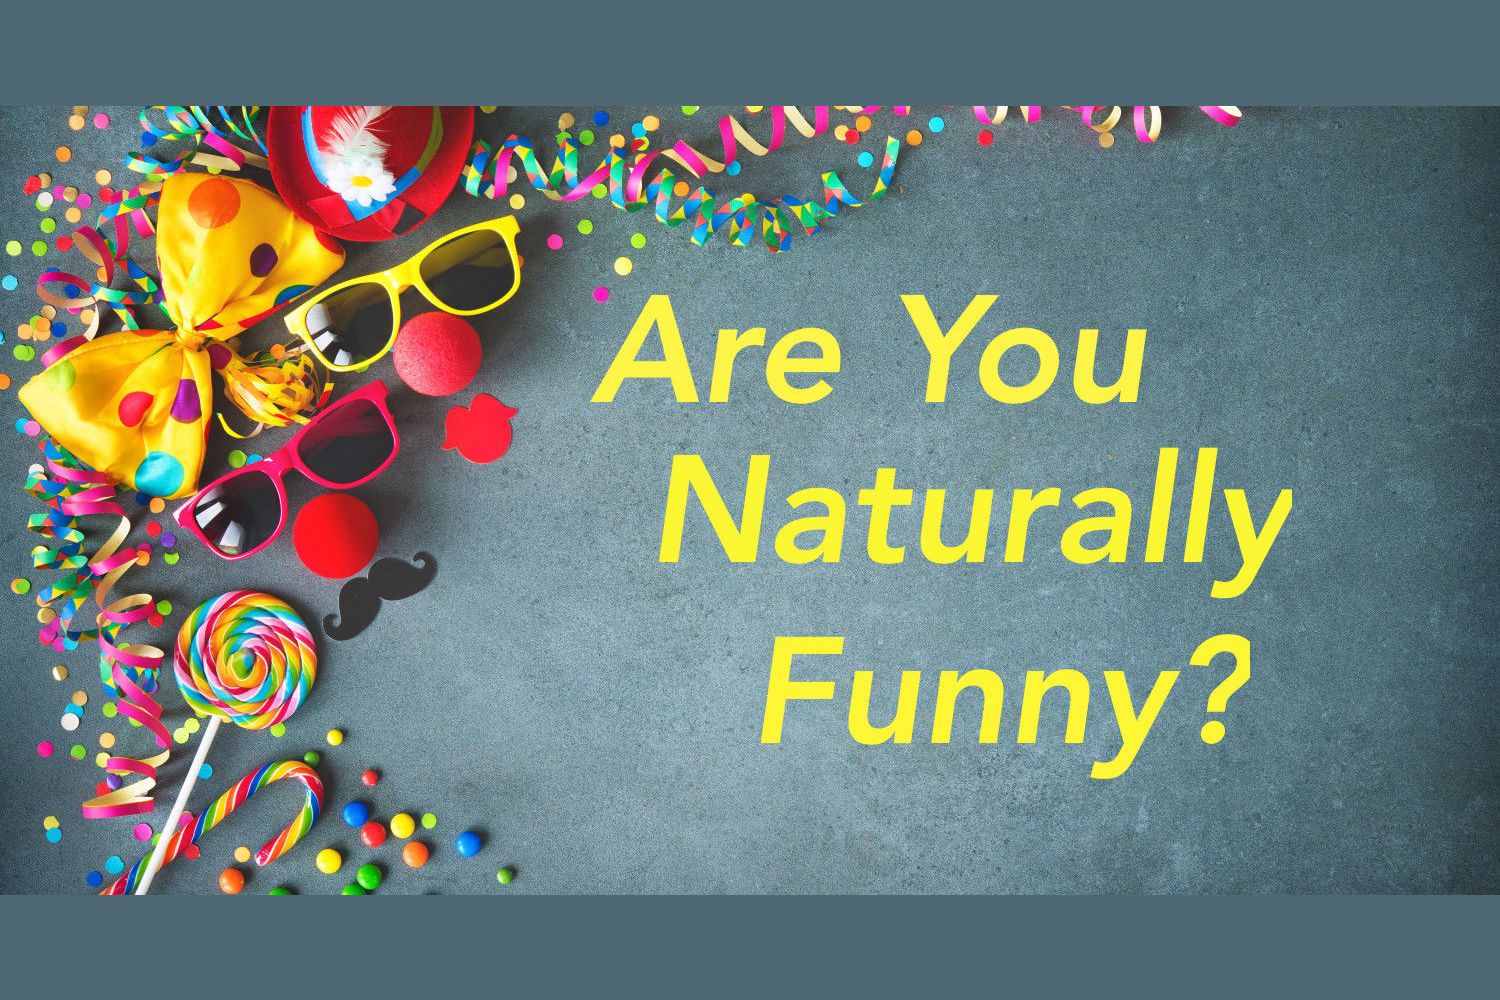 Are You Naturally Funny? Take This Quiz To Find Out